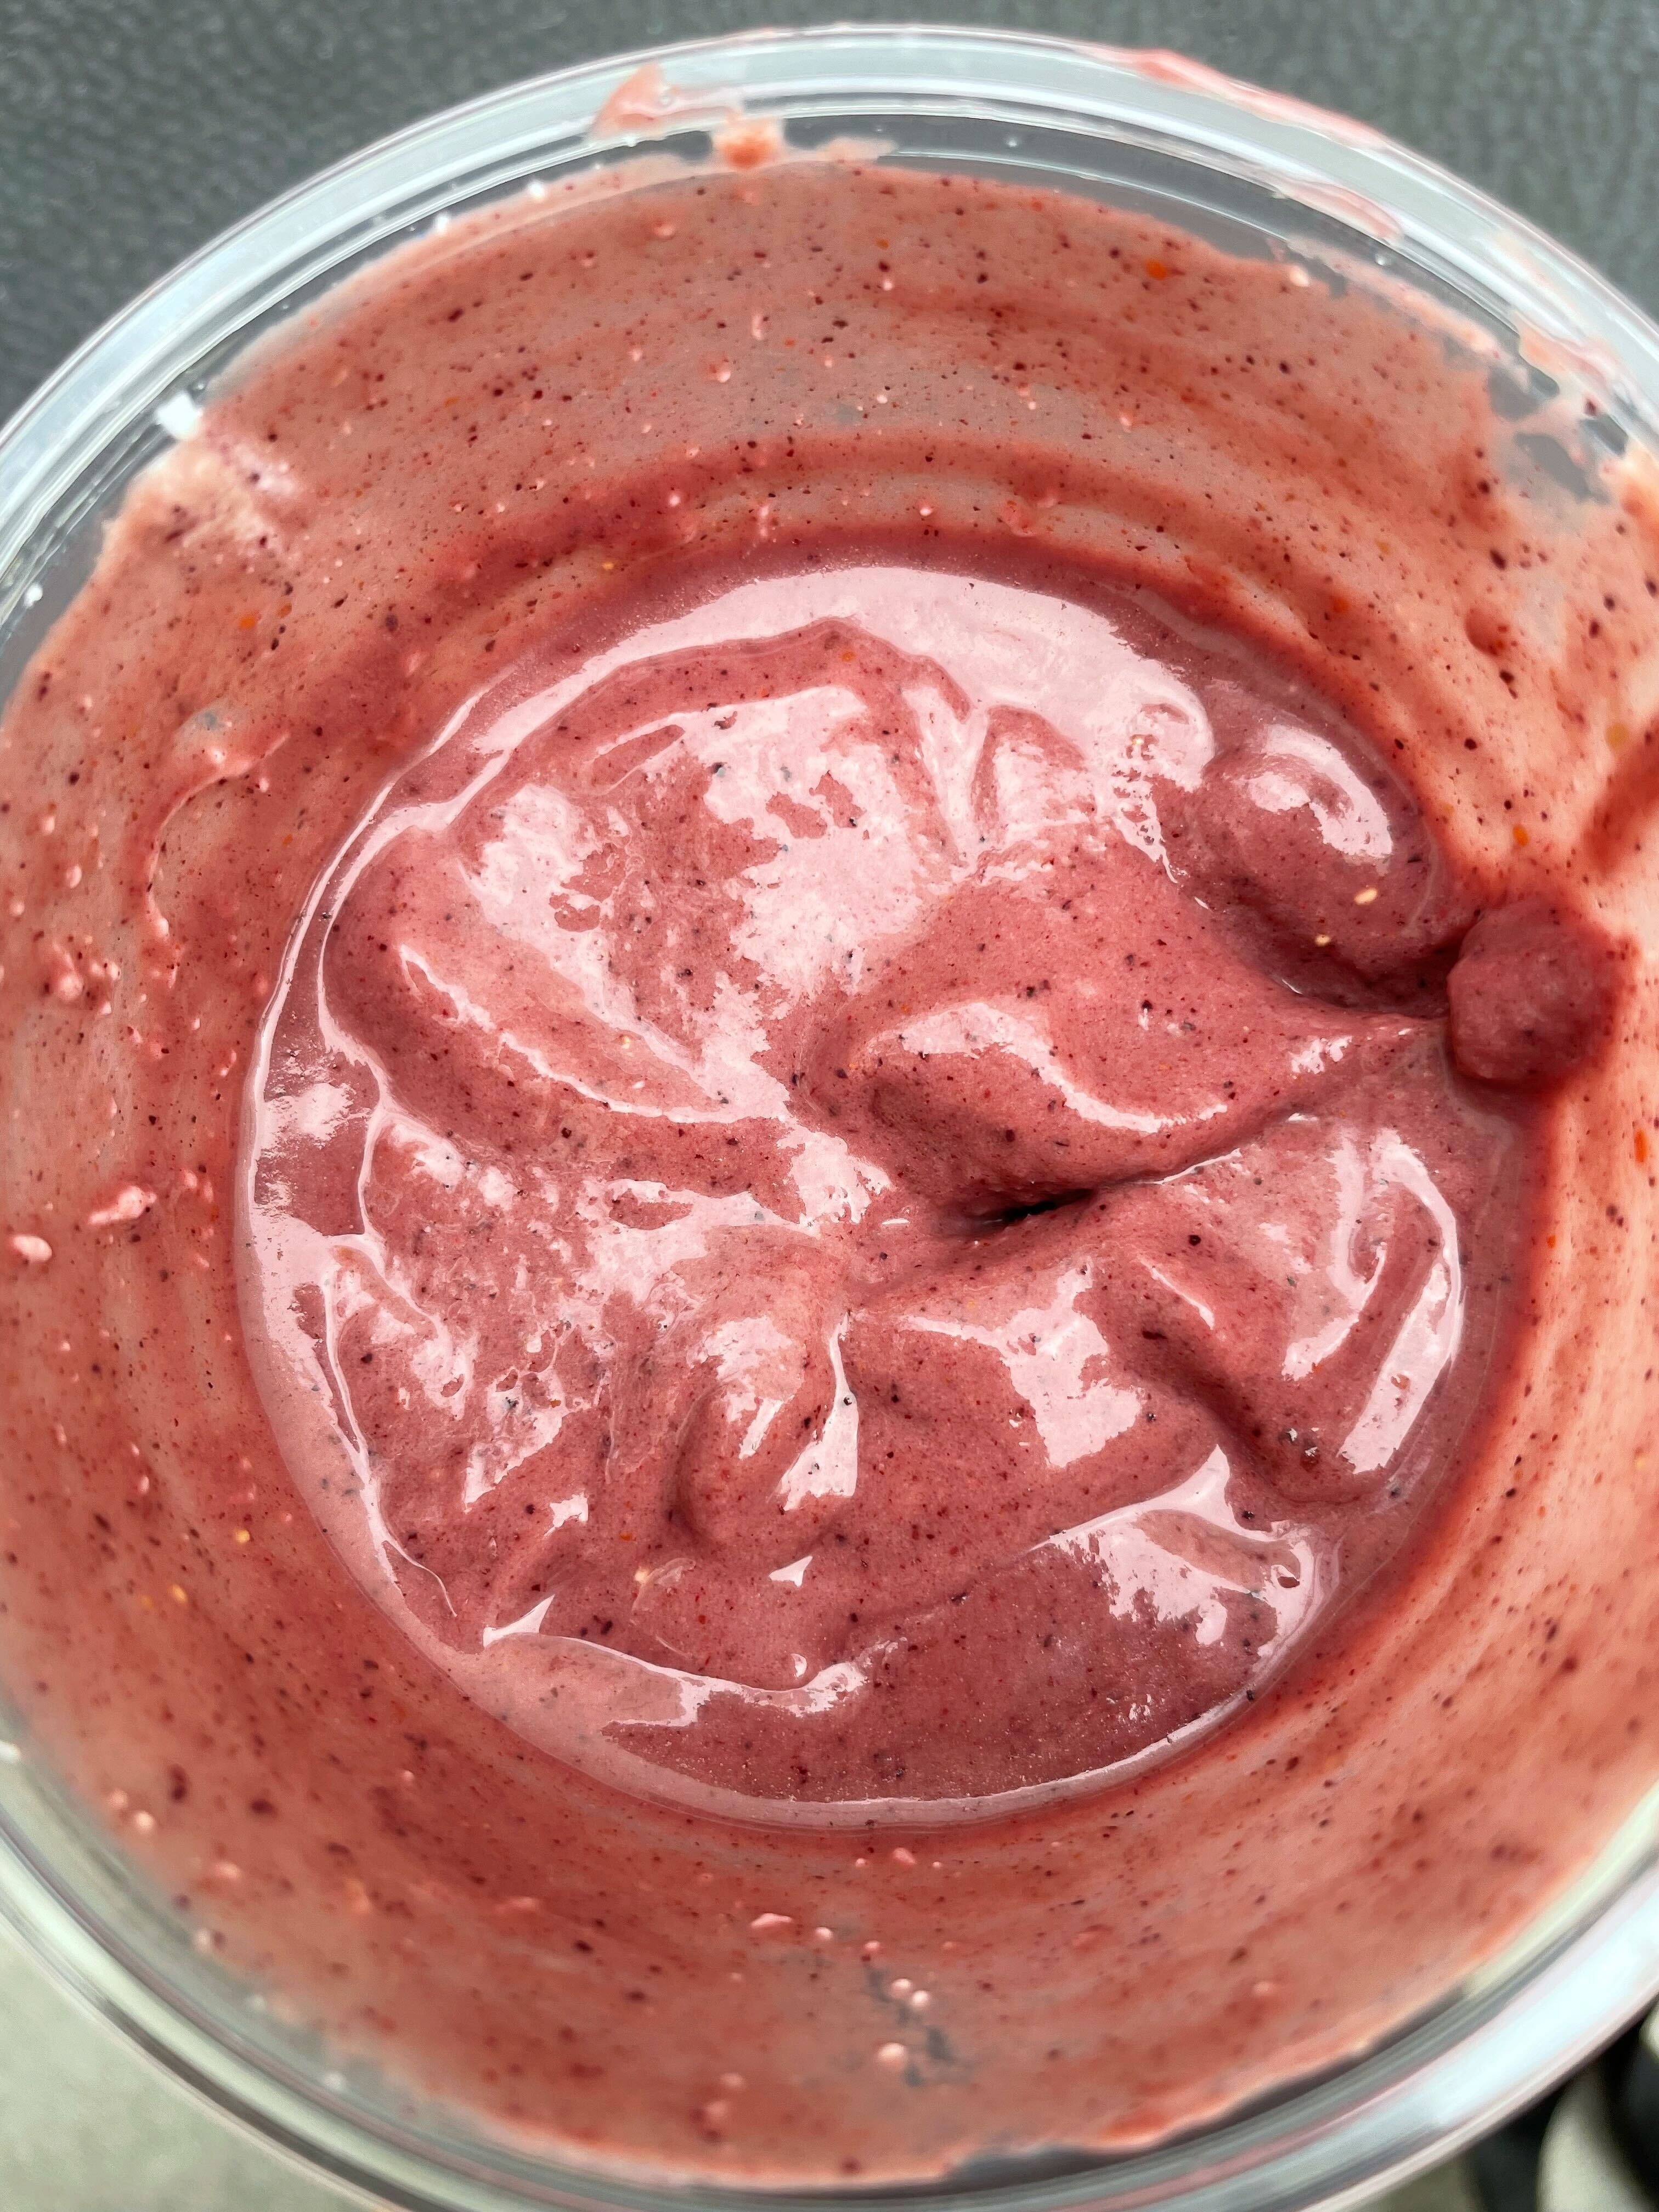 A closer look at the consistency of the &quot;Good 4 ur GUTS&quot; smoothie